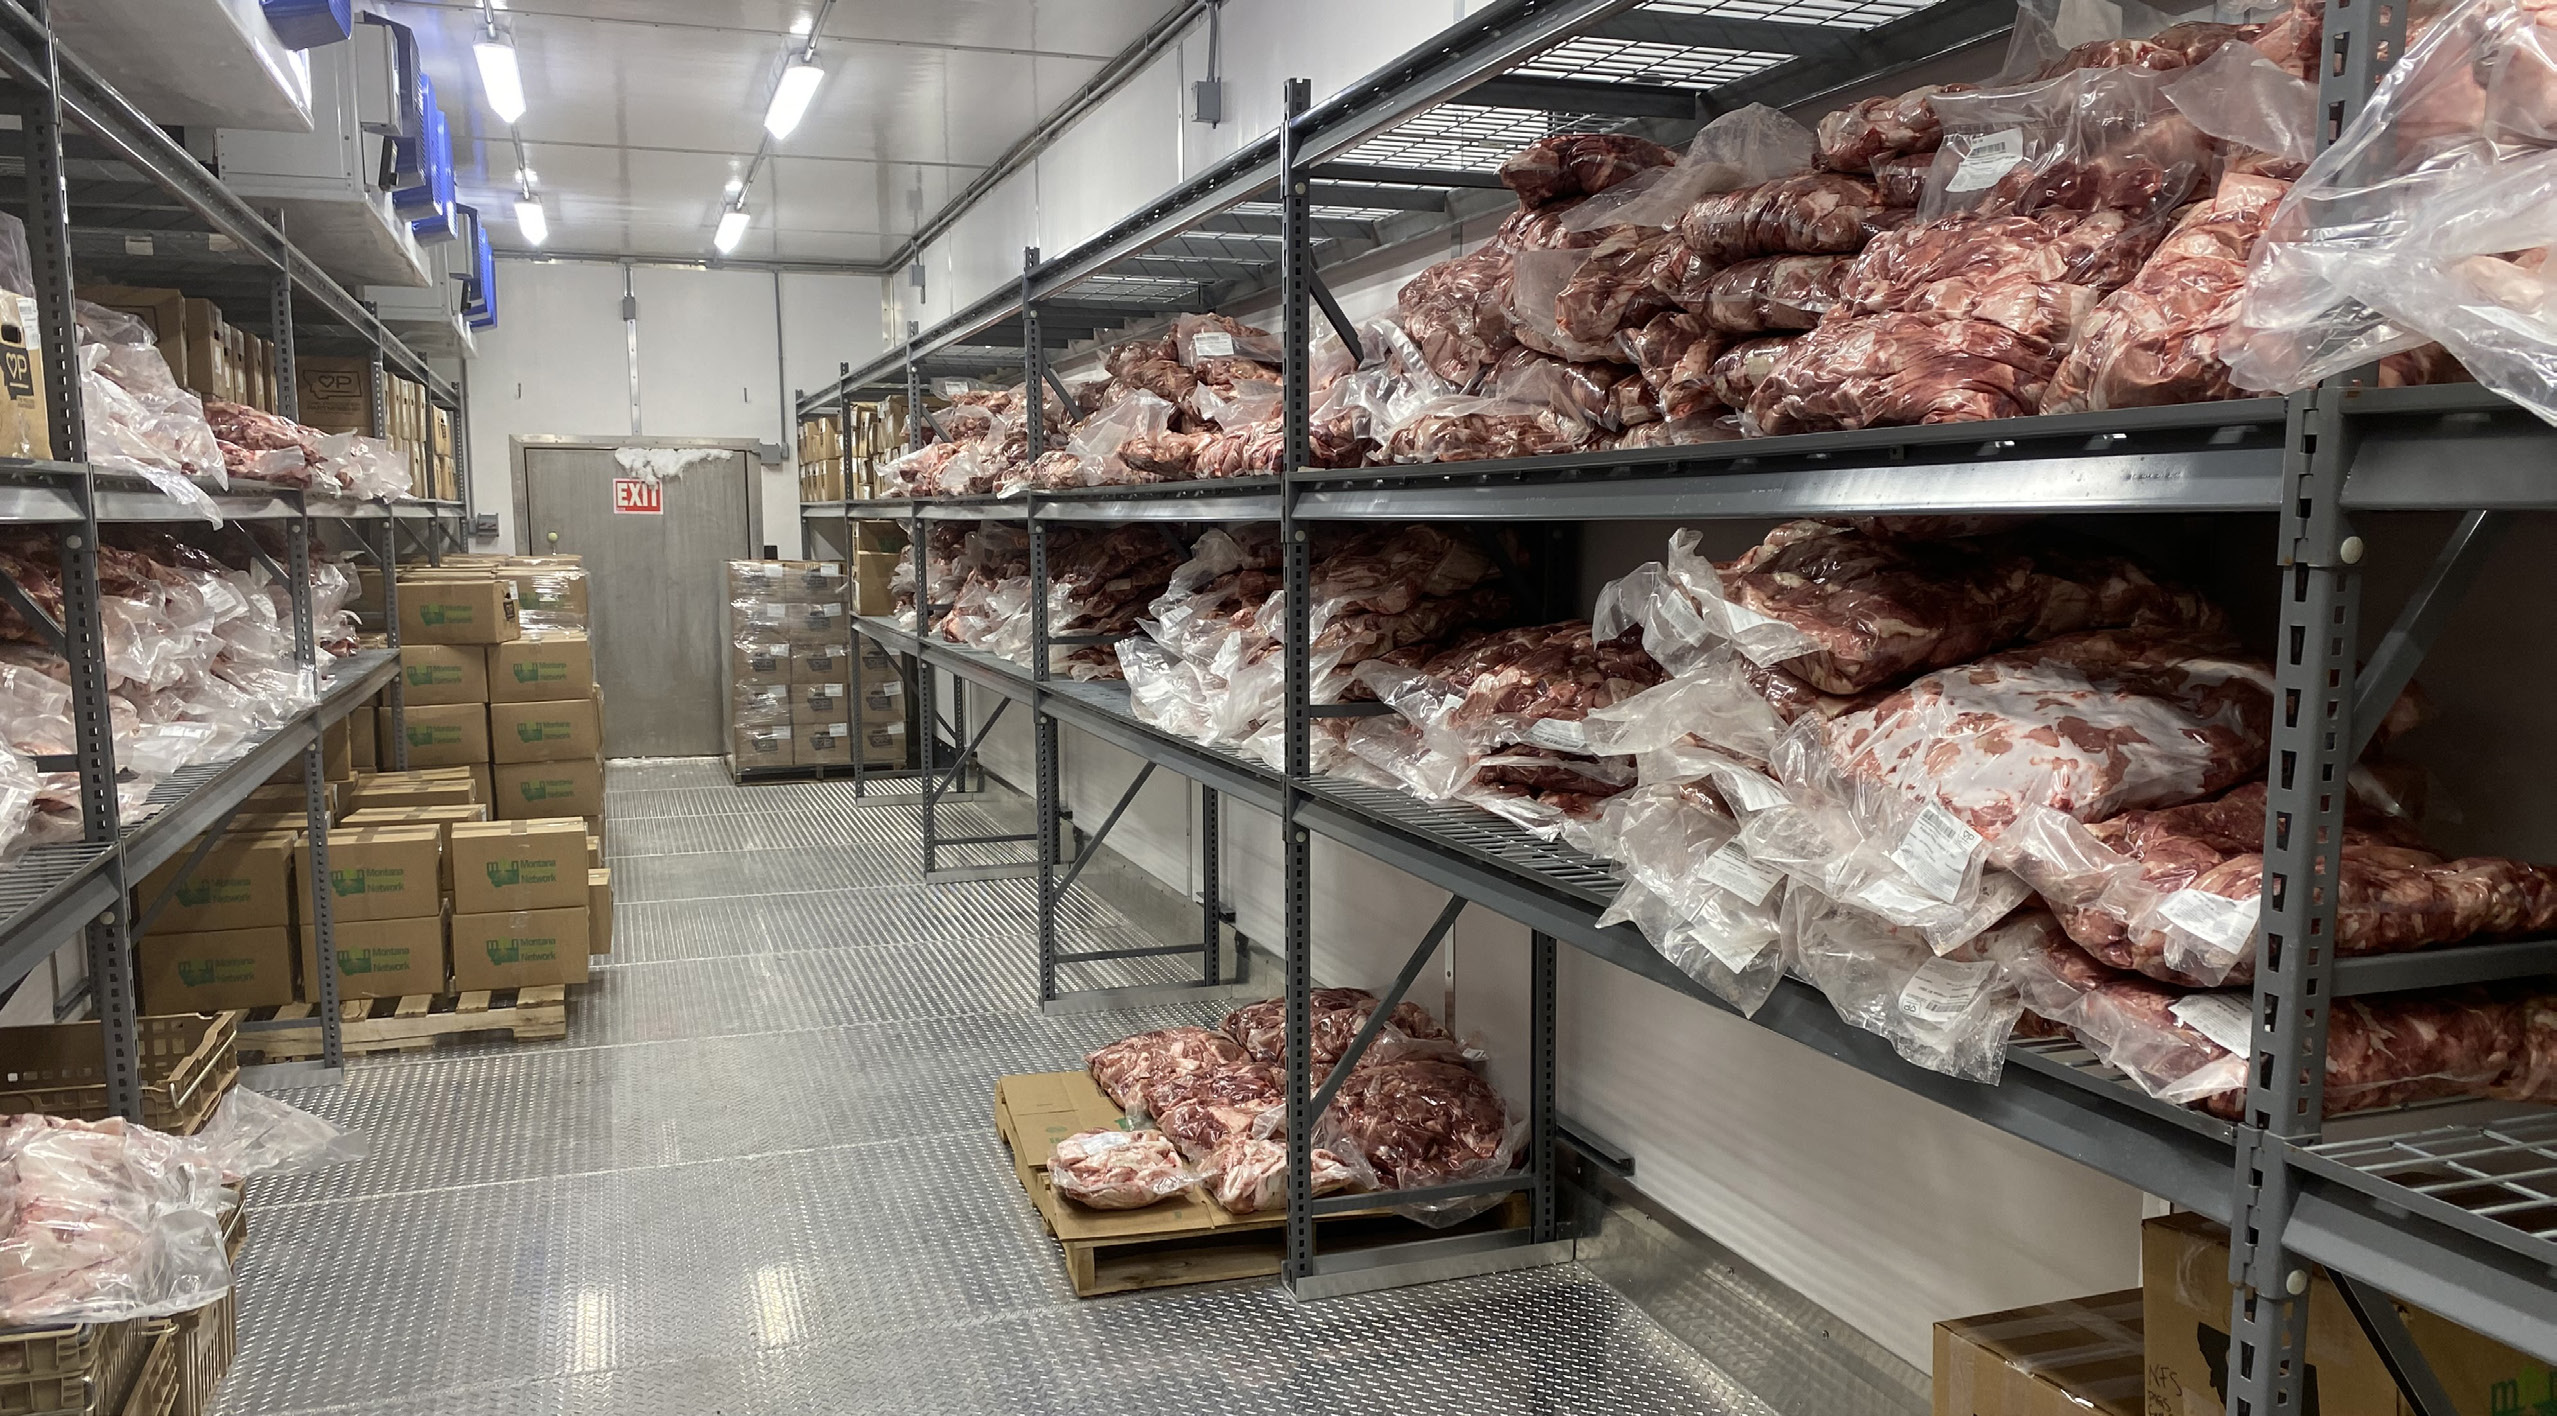 vaccuum sealed packages of meat fill the metal shelves of a large walk-in freezer